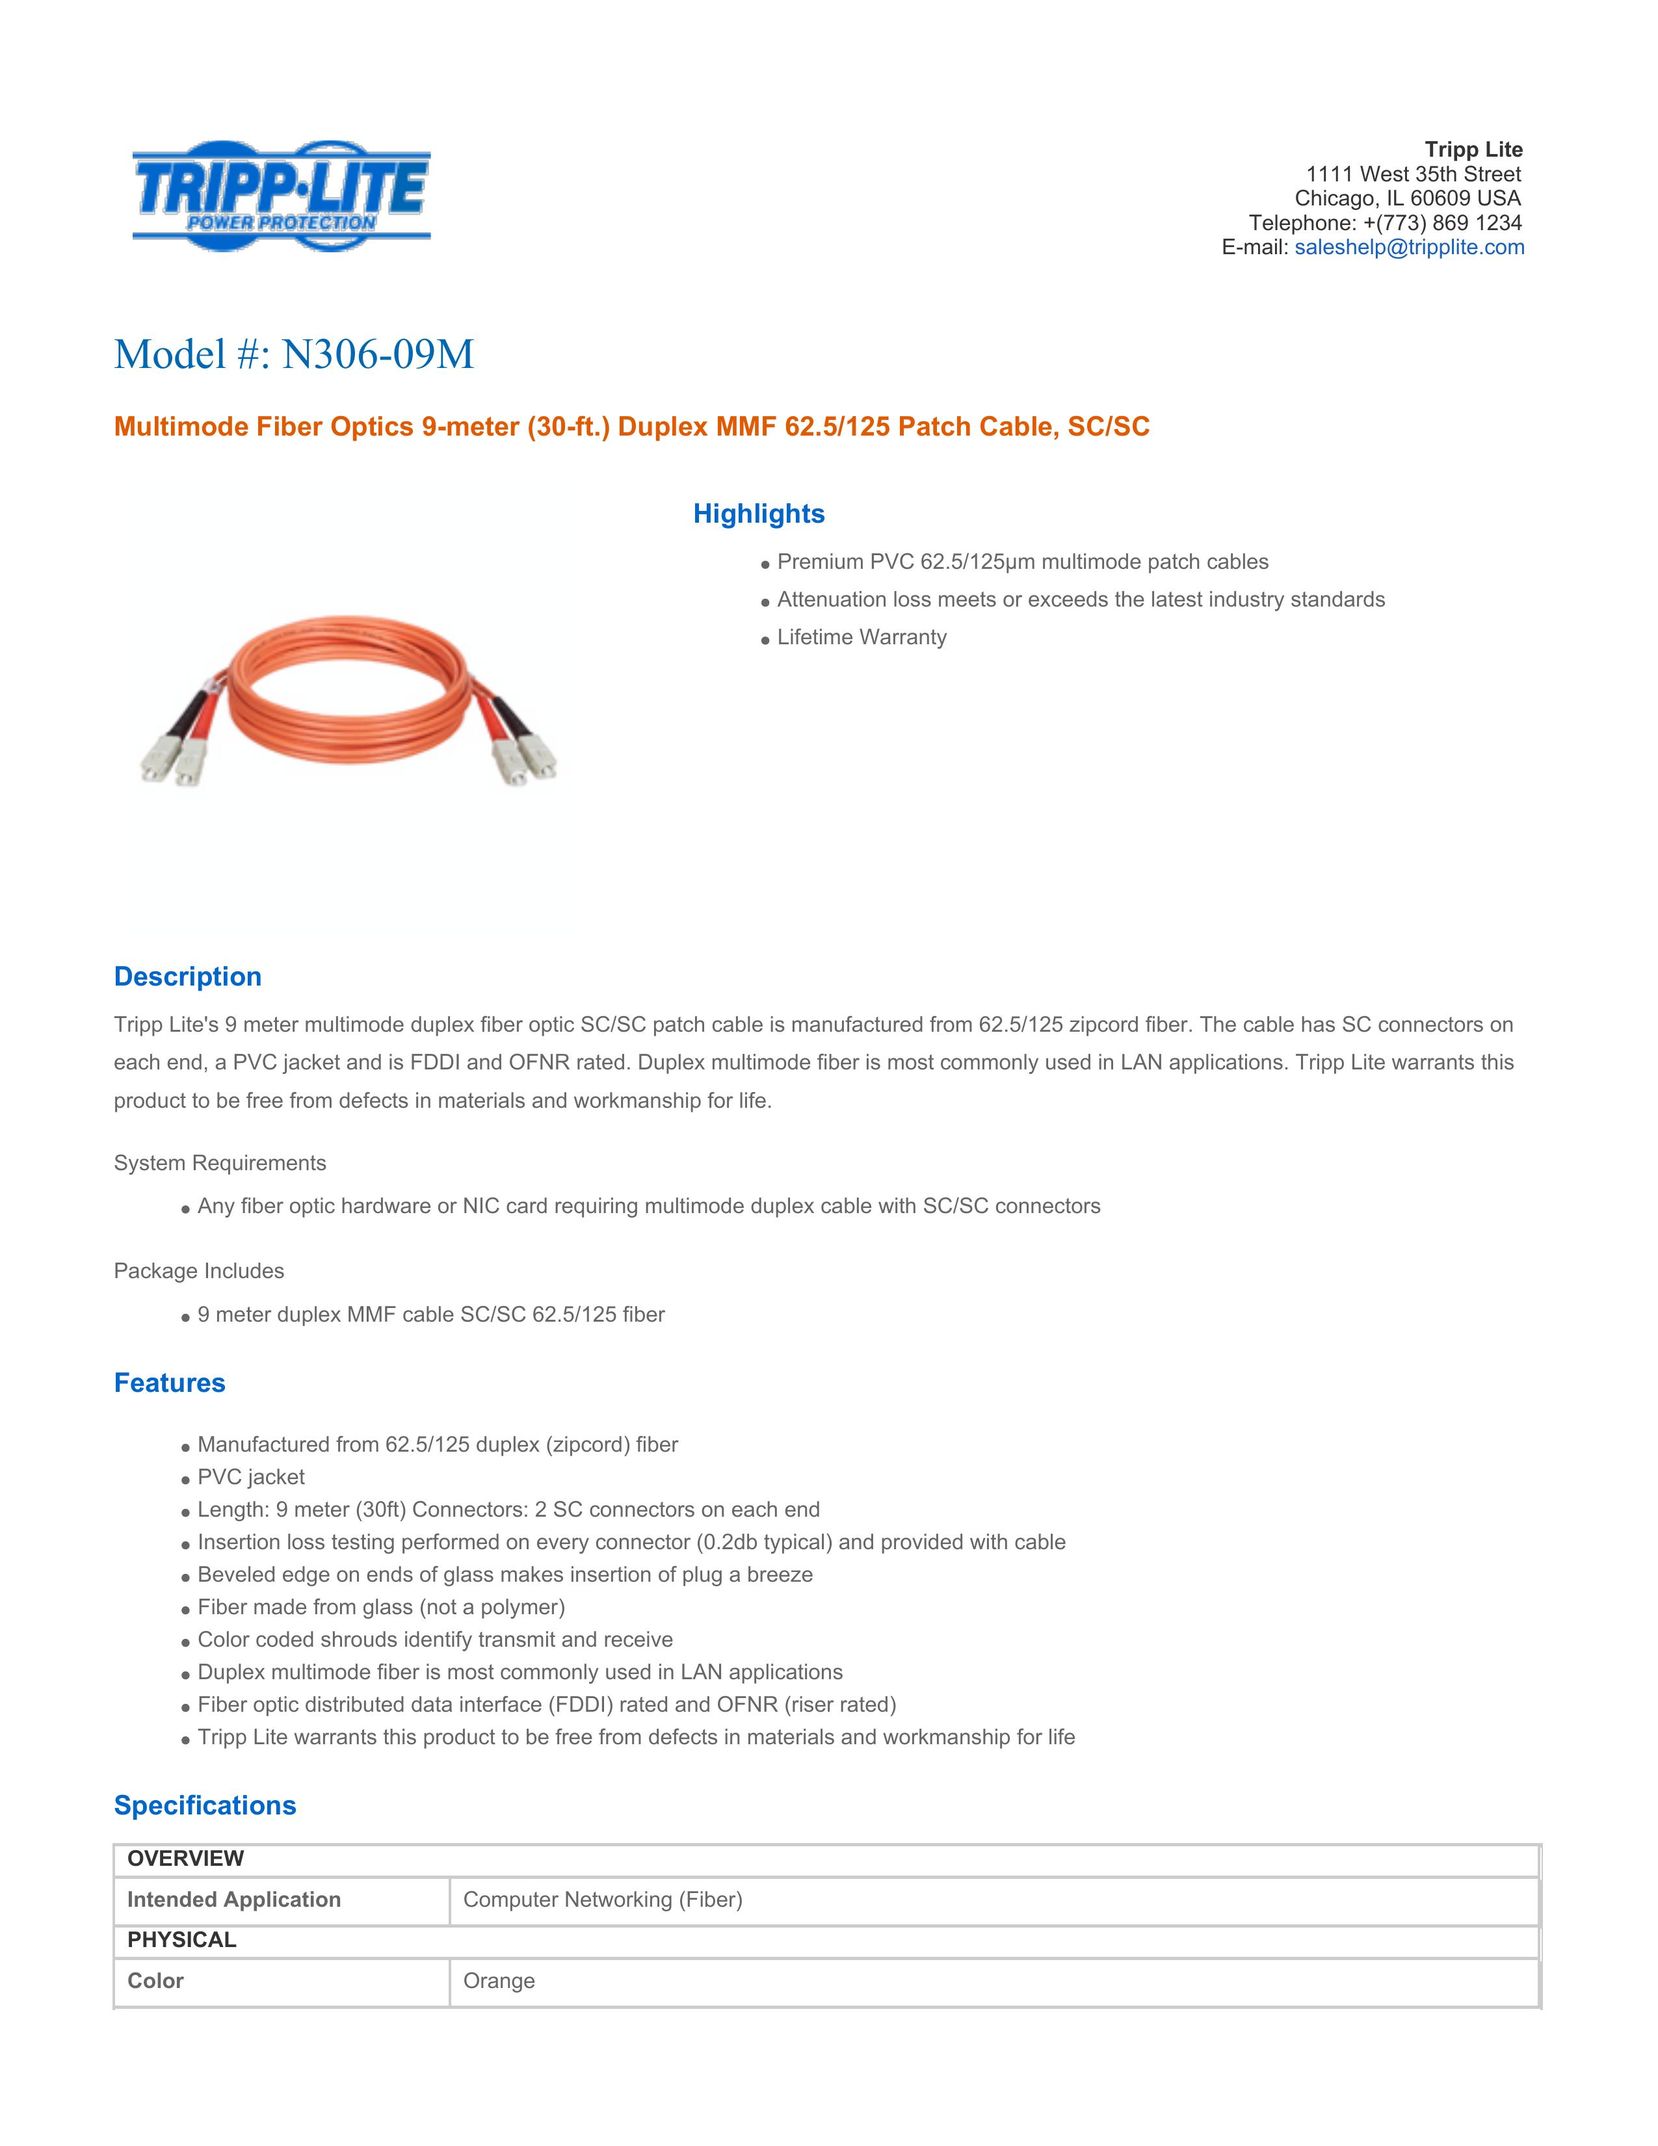 Tripp Lite 306-09M Network Cables User Manual